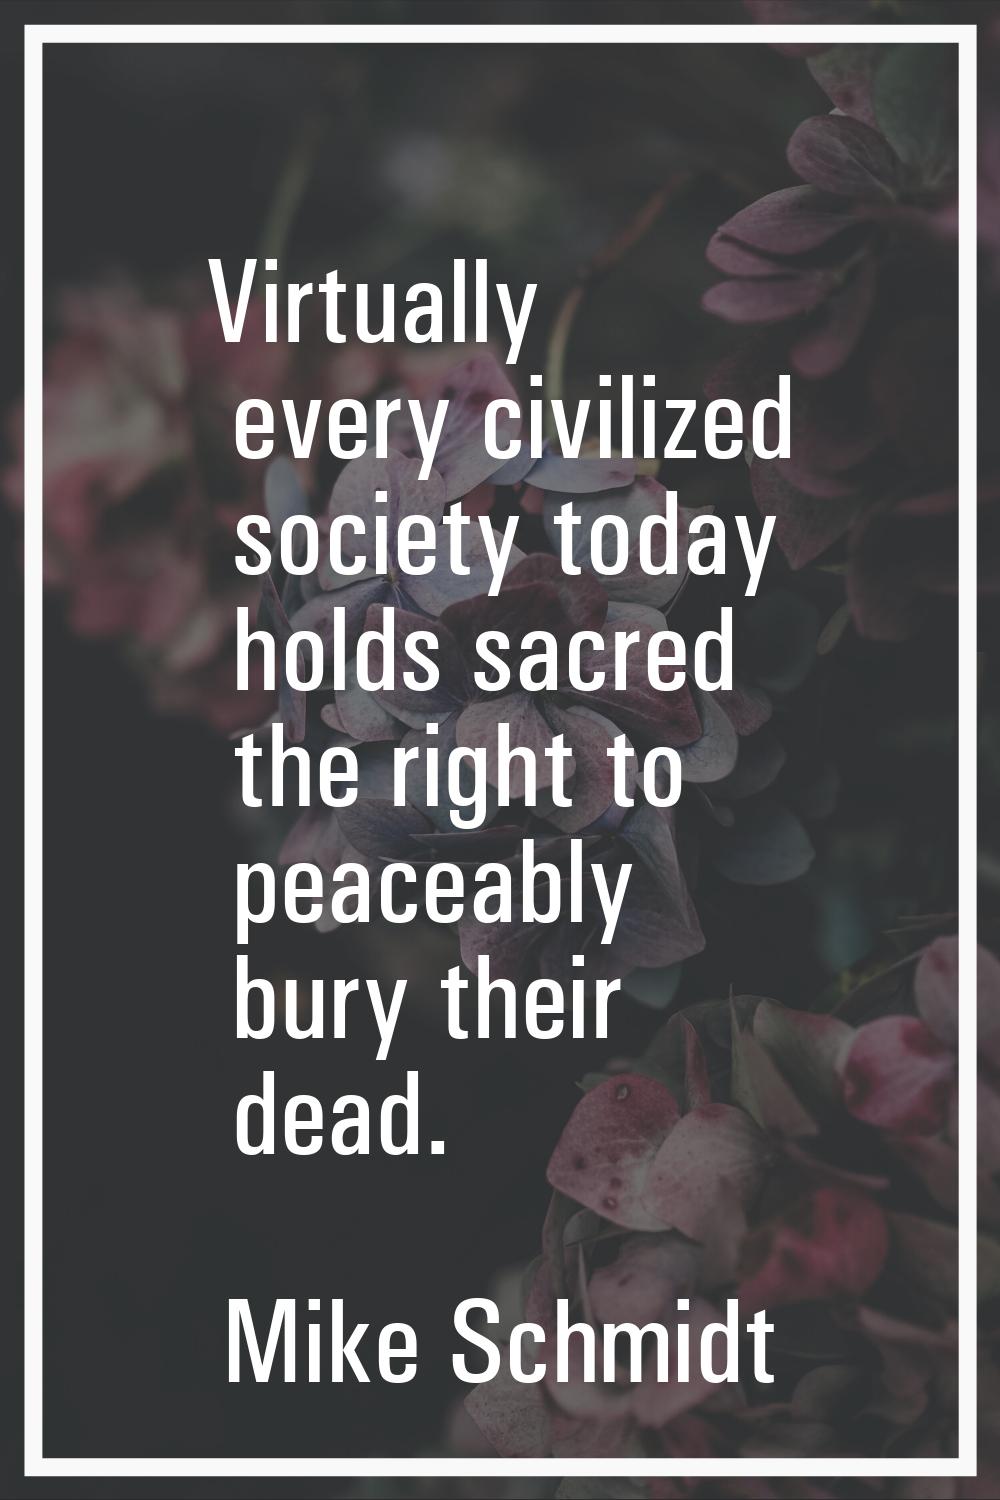 Virtually every civilized society today holds sacred the right to peaceably bury their dead.